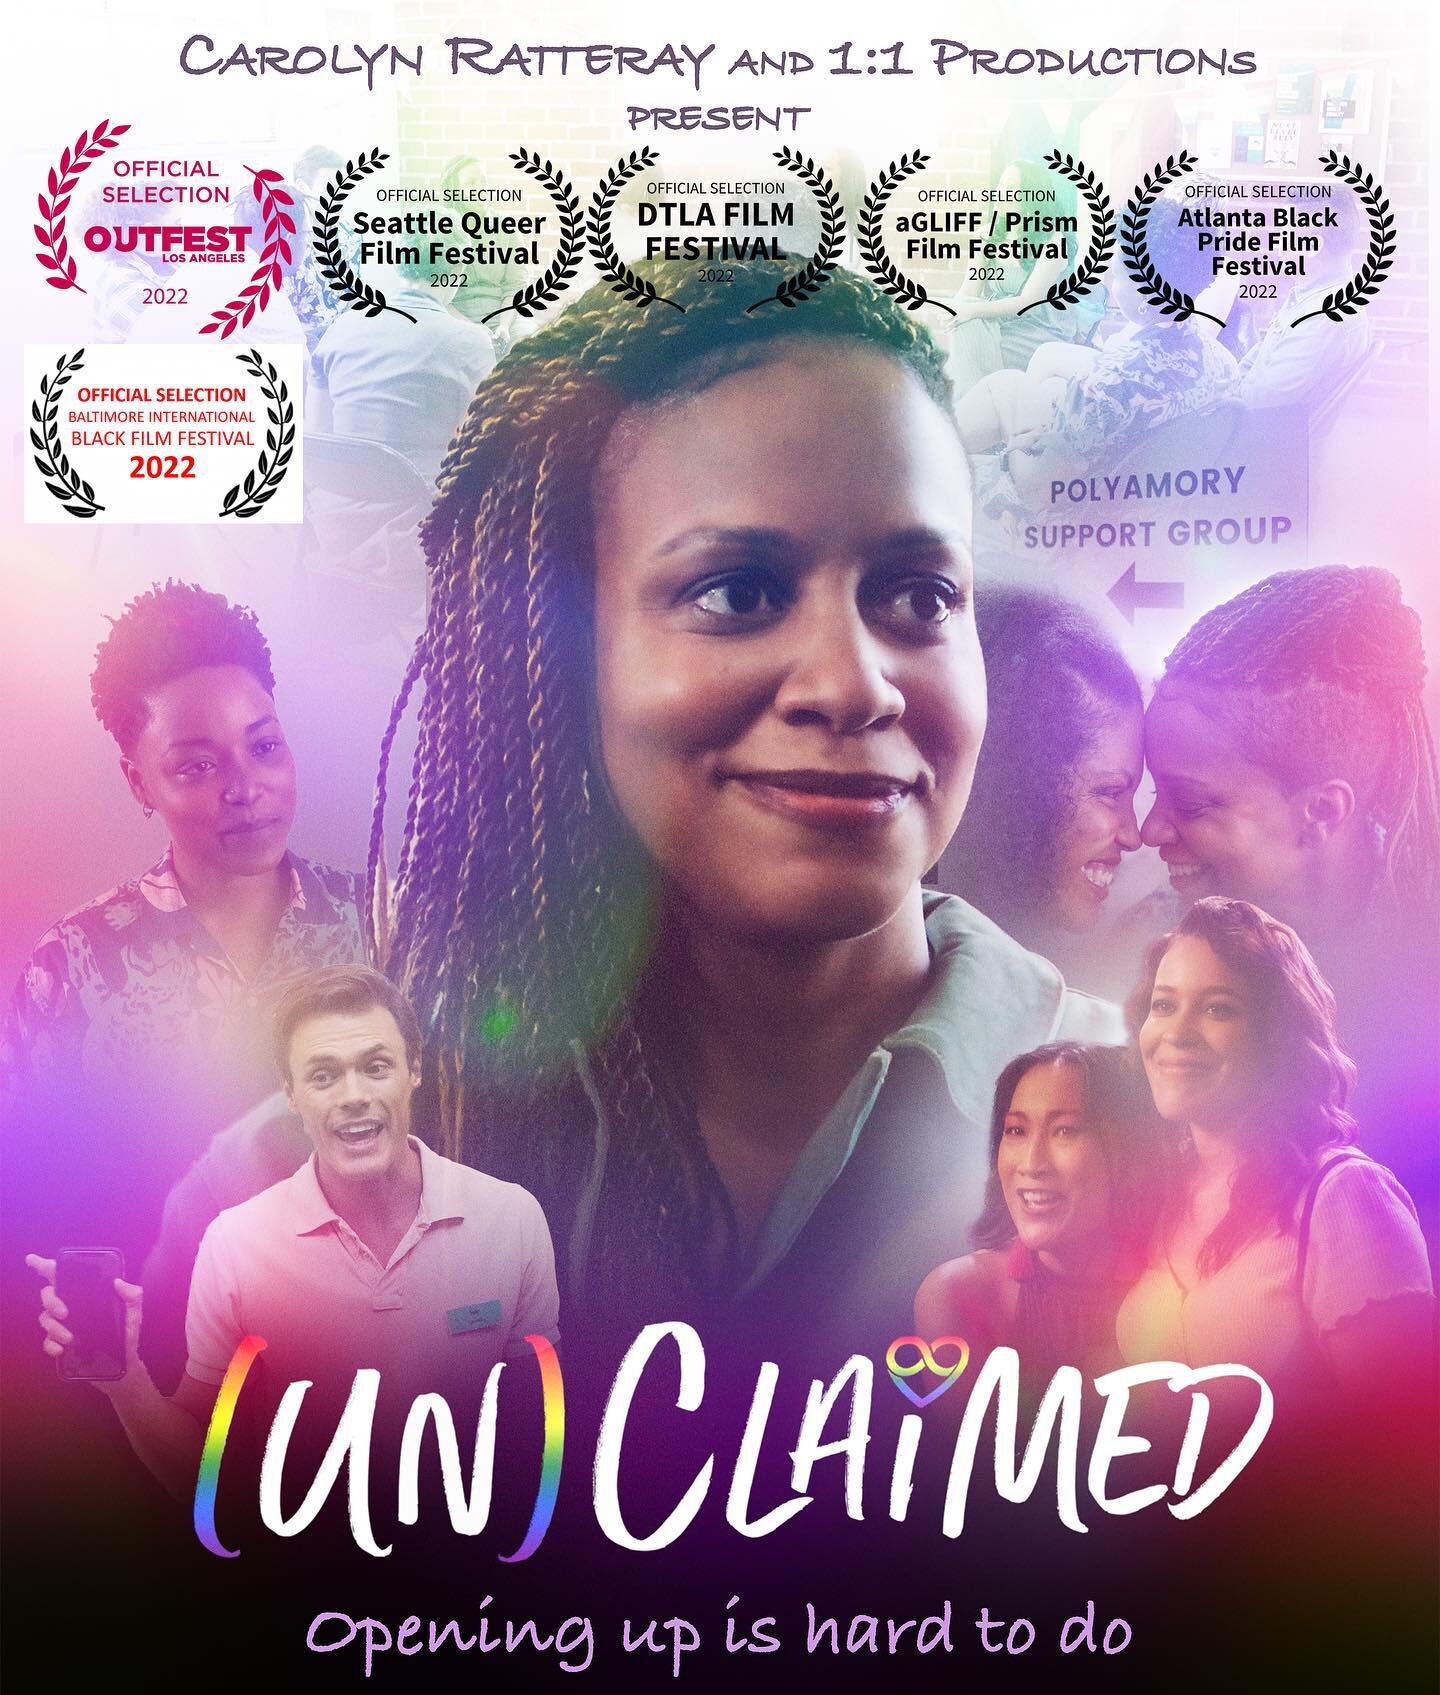 Look at us go! We haven&rsquo;t  had a chance to post about all the great festivals @unclaimed2022 (UN)CLAIMED has been named an Official Selection of! Congrats to everyone! @carolynratteray @karlamose @tinahuang381  @seattlequeerfilmfestival @outfes